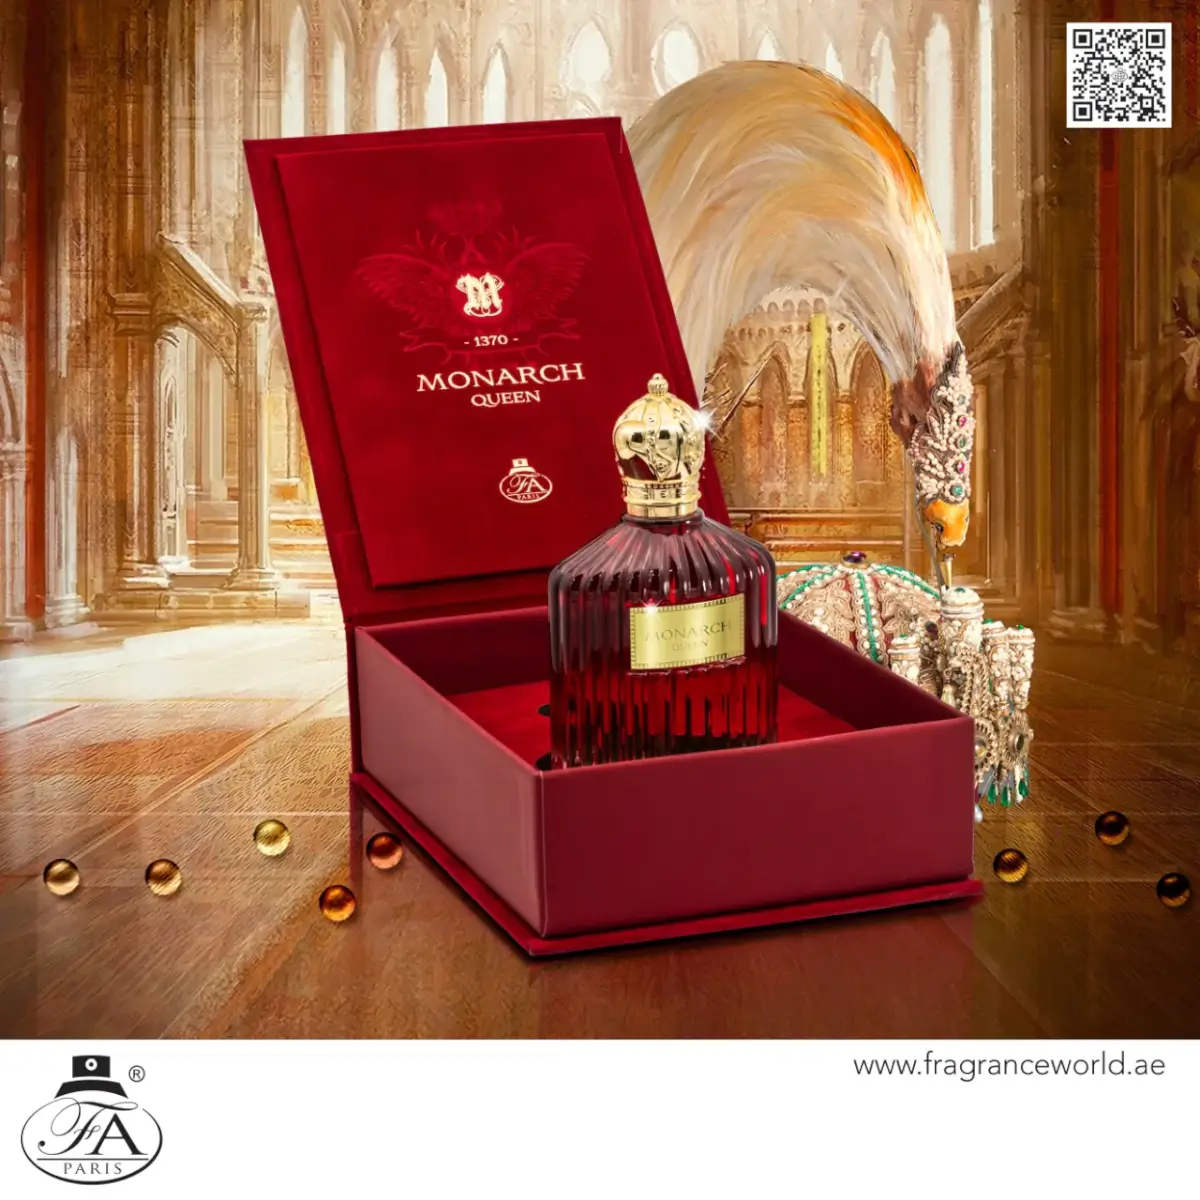 Monarch Queen Perfume / Eau De Parfum By Fa Paris (Fragrance World) Is Elegant And Irresistible Effortless In Her Elegance, Confident And Self-Assured. Her Glamourous Aura Turns Heads And Eyes Wonder When She Walks Into The Room. Soghaat Gifts &Amp; Fragrances